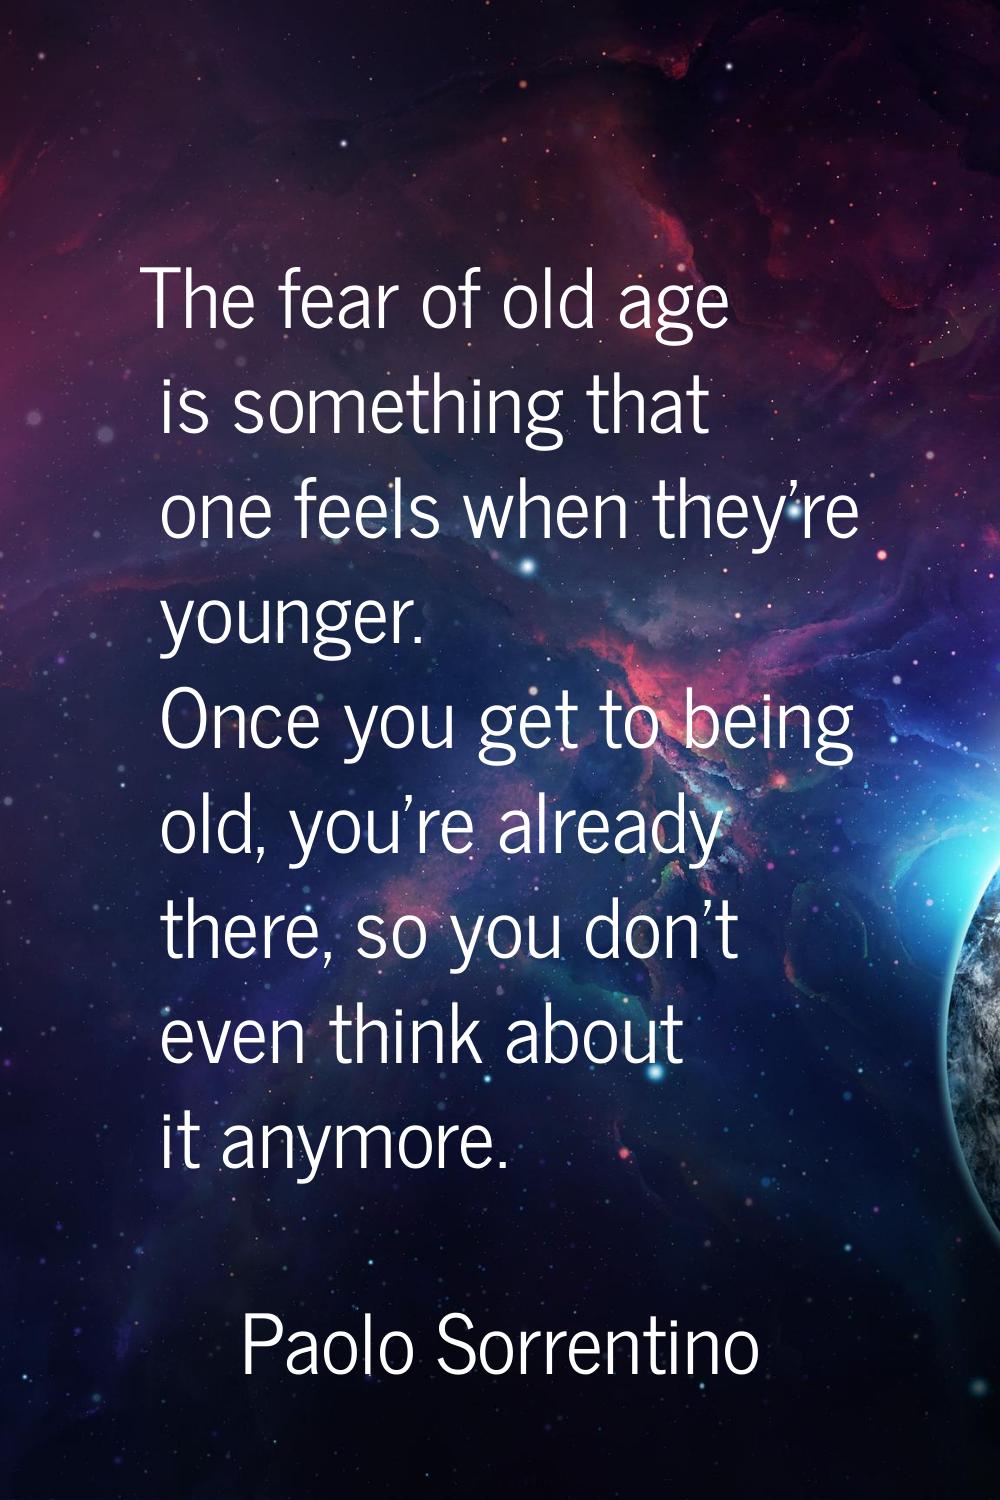 The fear of old age is something that one feels when they're younger. Once you get to being old, yo